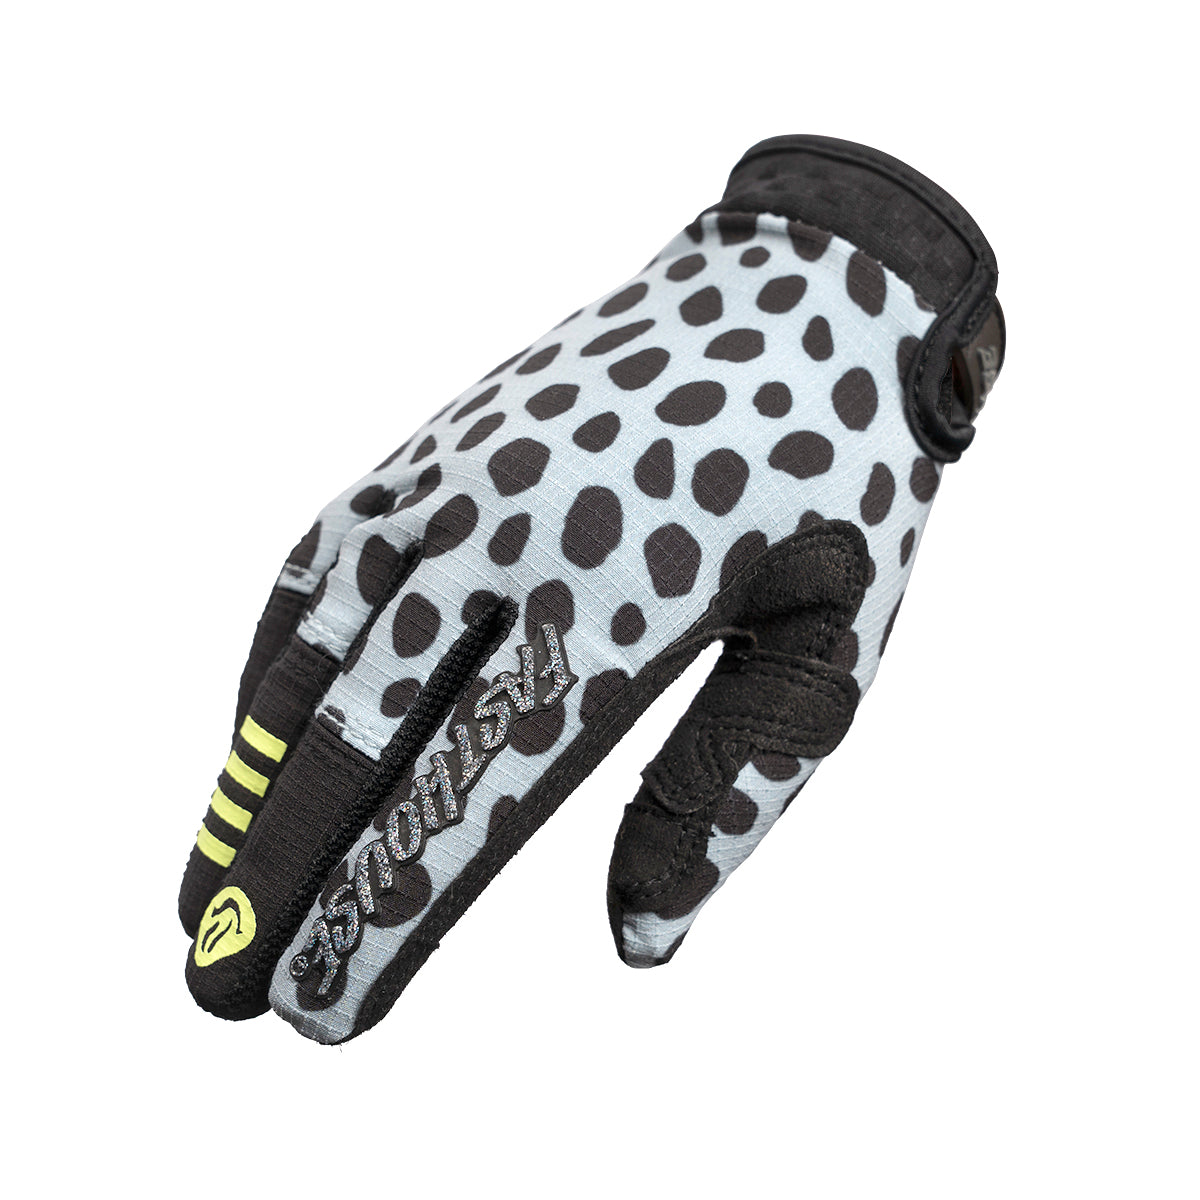 Speed Style Zenith Youth Glove - Skyline/Party Lime